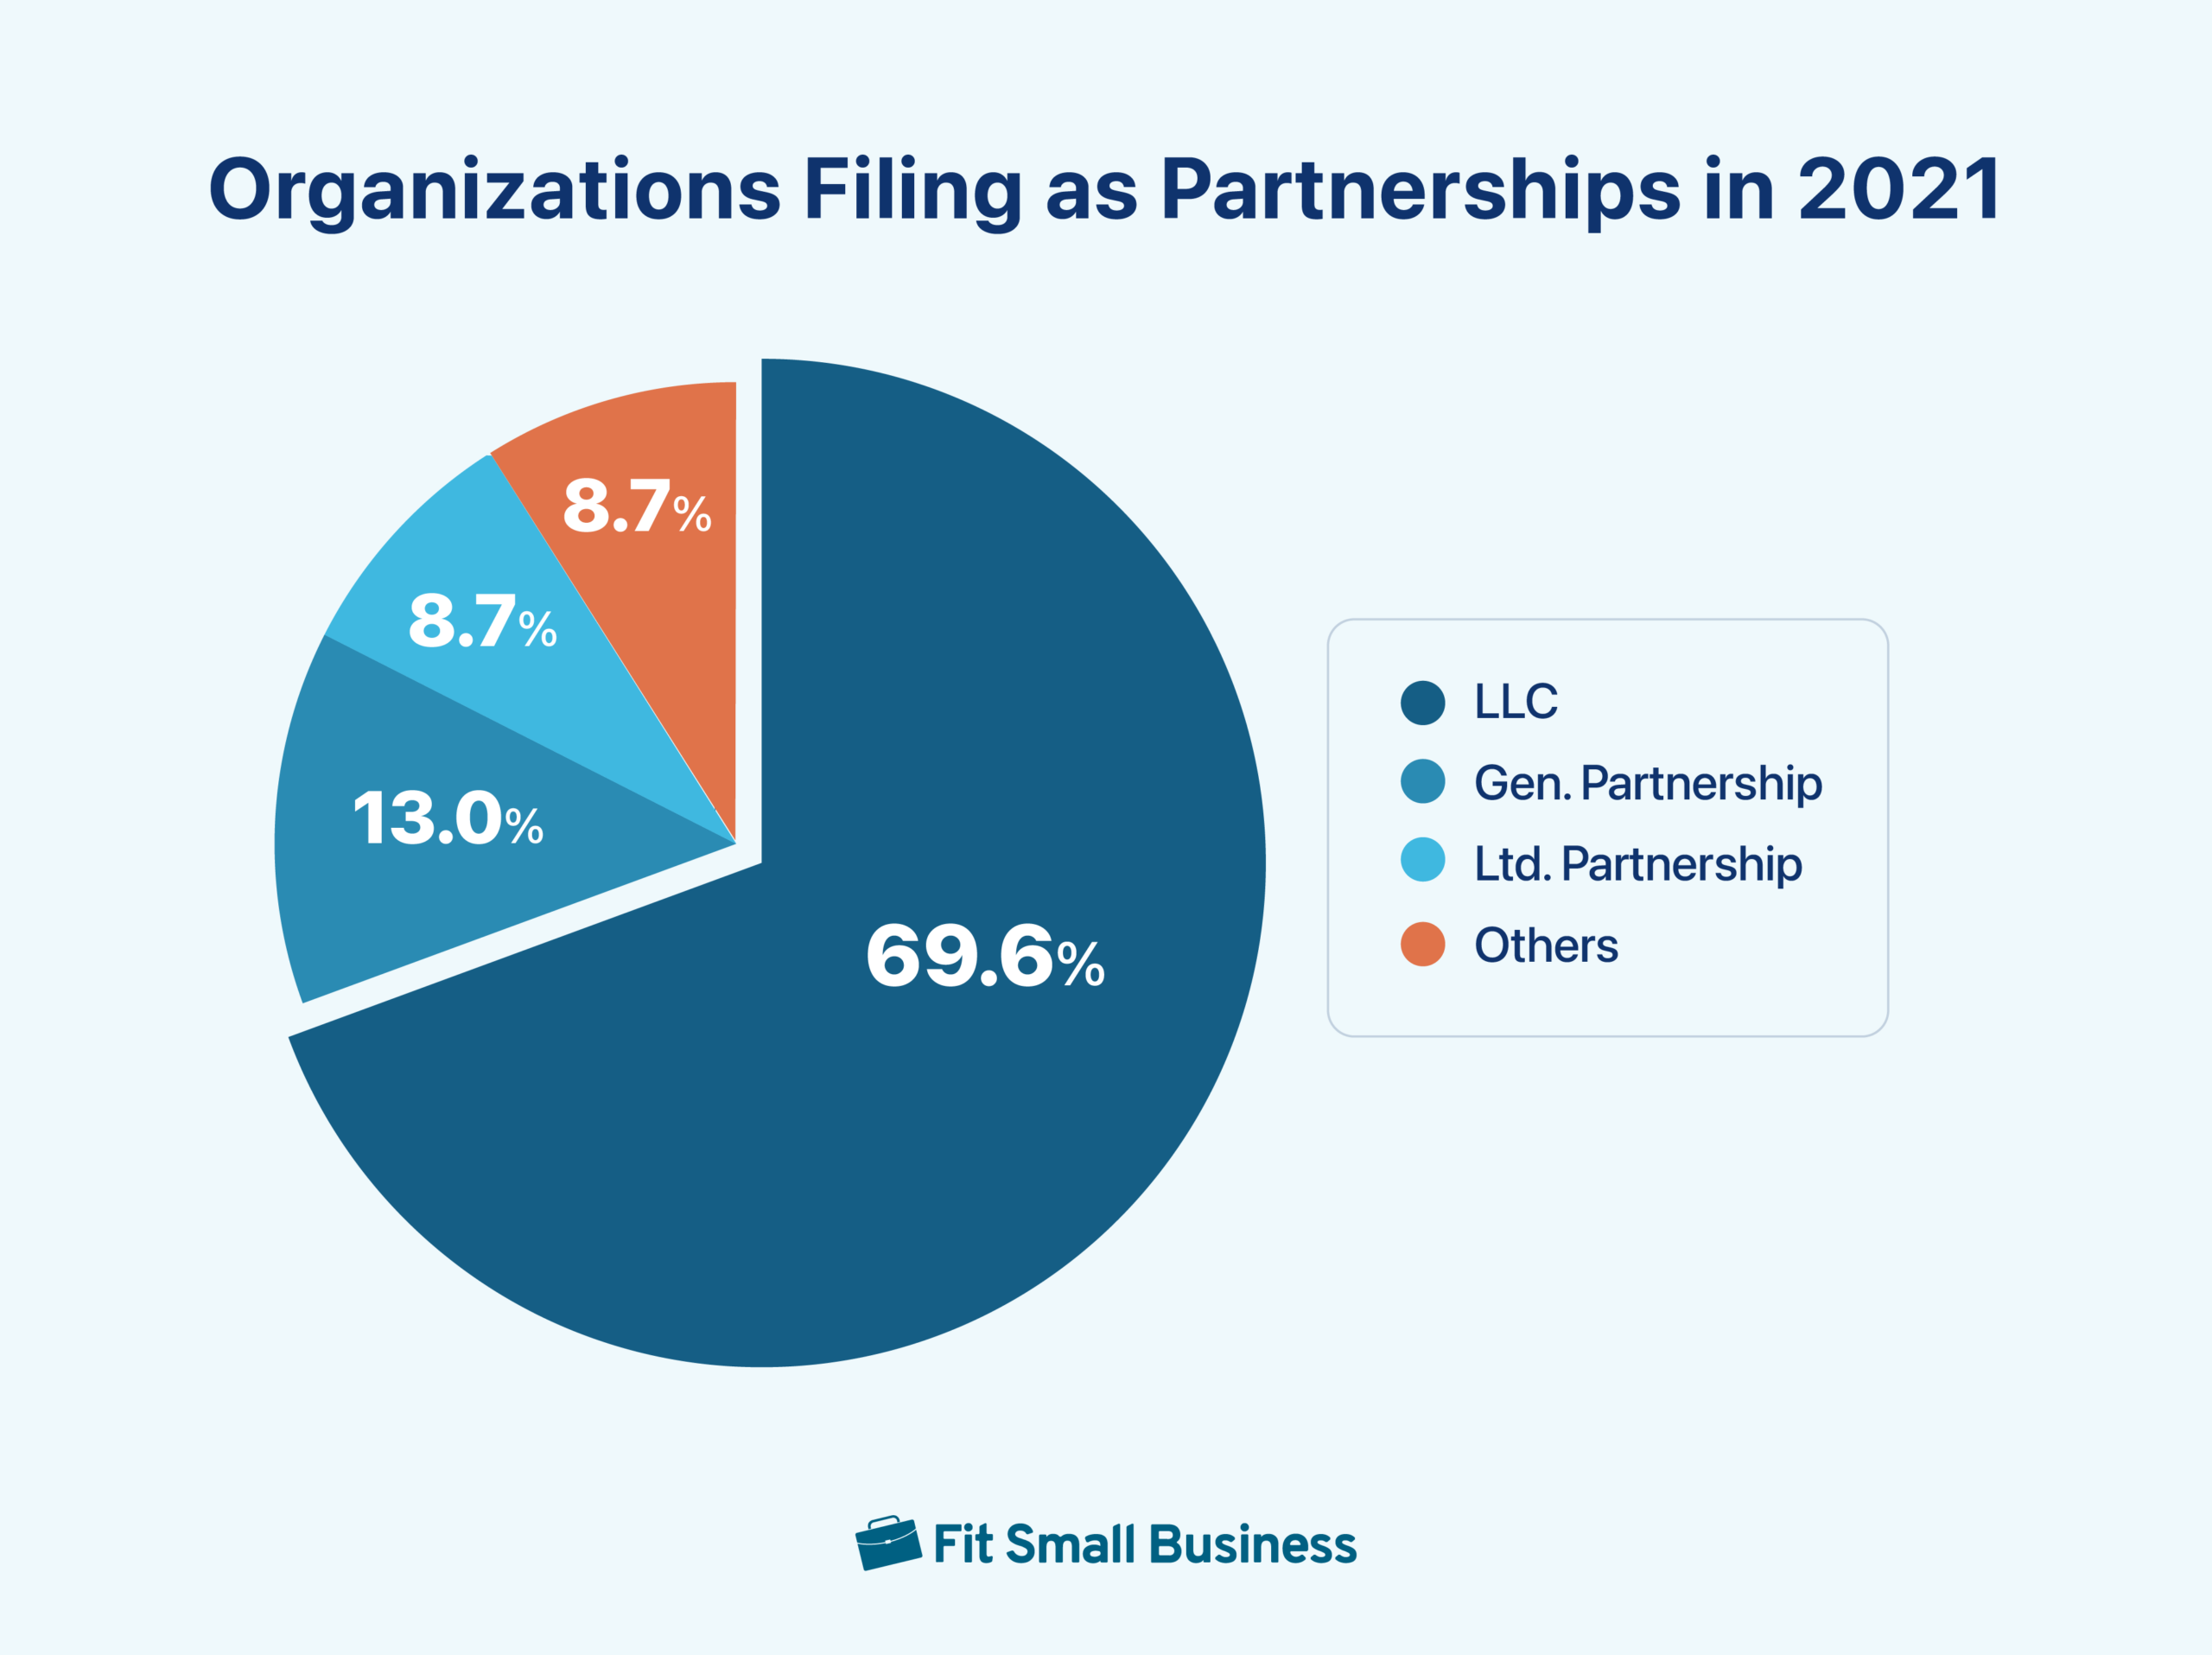 A pie chart visualizing the composition of organizations filing as partnerships in 2021.